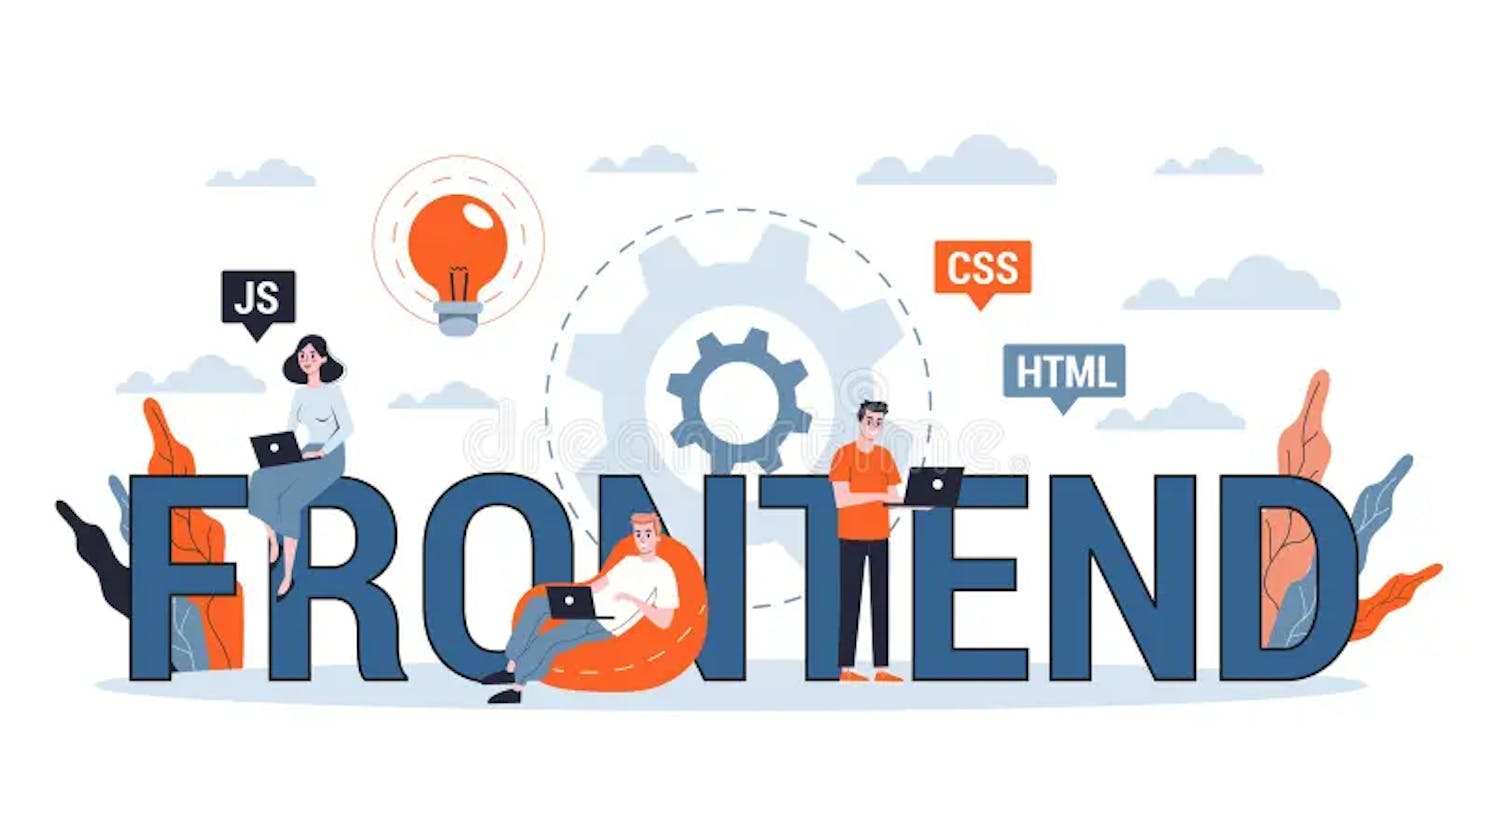 Who is a Frontend Developer? Explain the role and responsibilities in your own words?